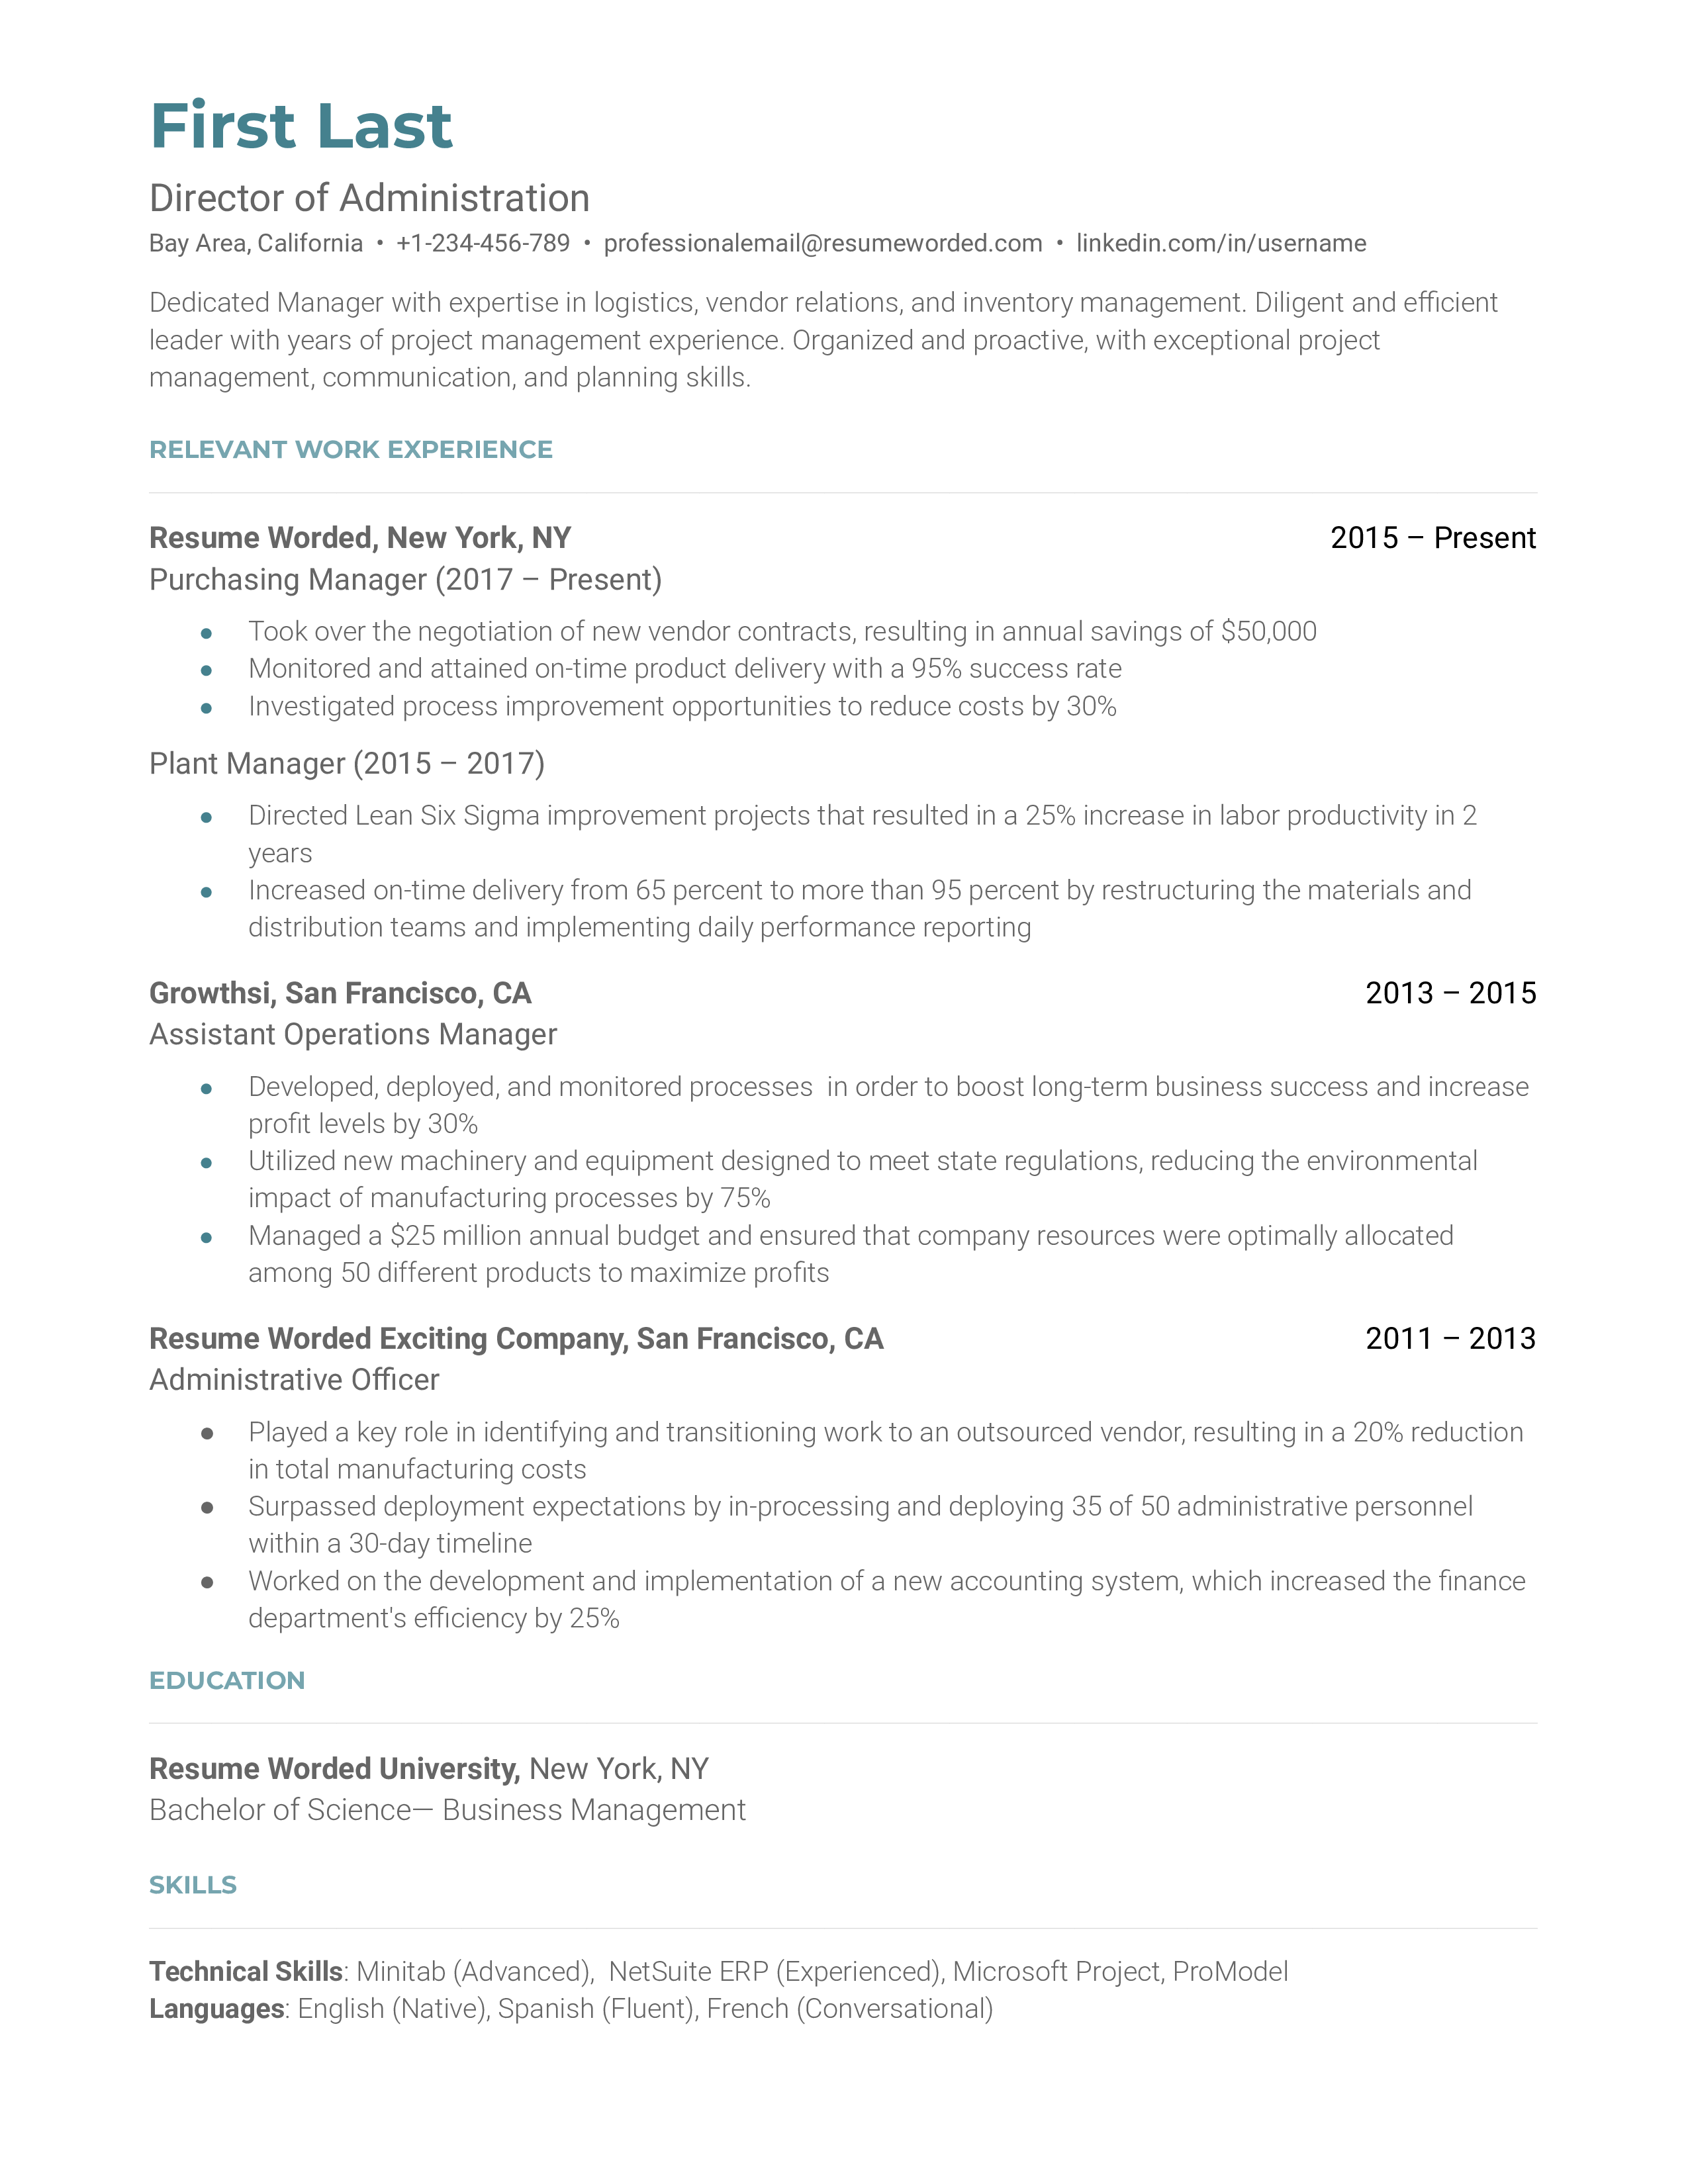 A director of administration resume template using a brief professional description and relevant work experience.